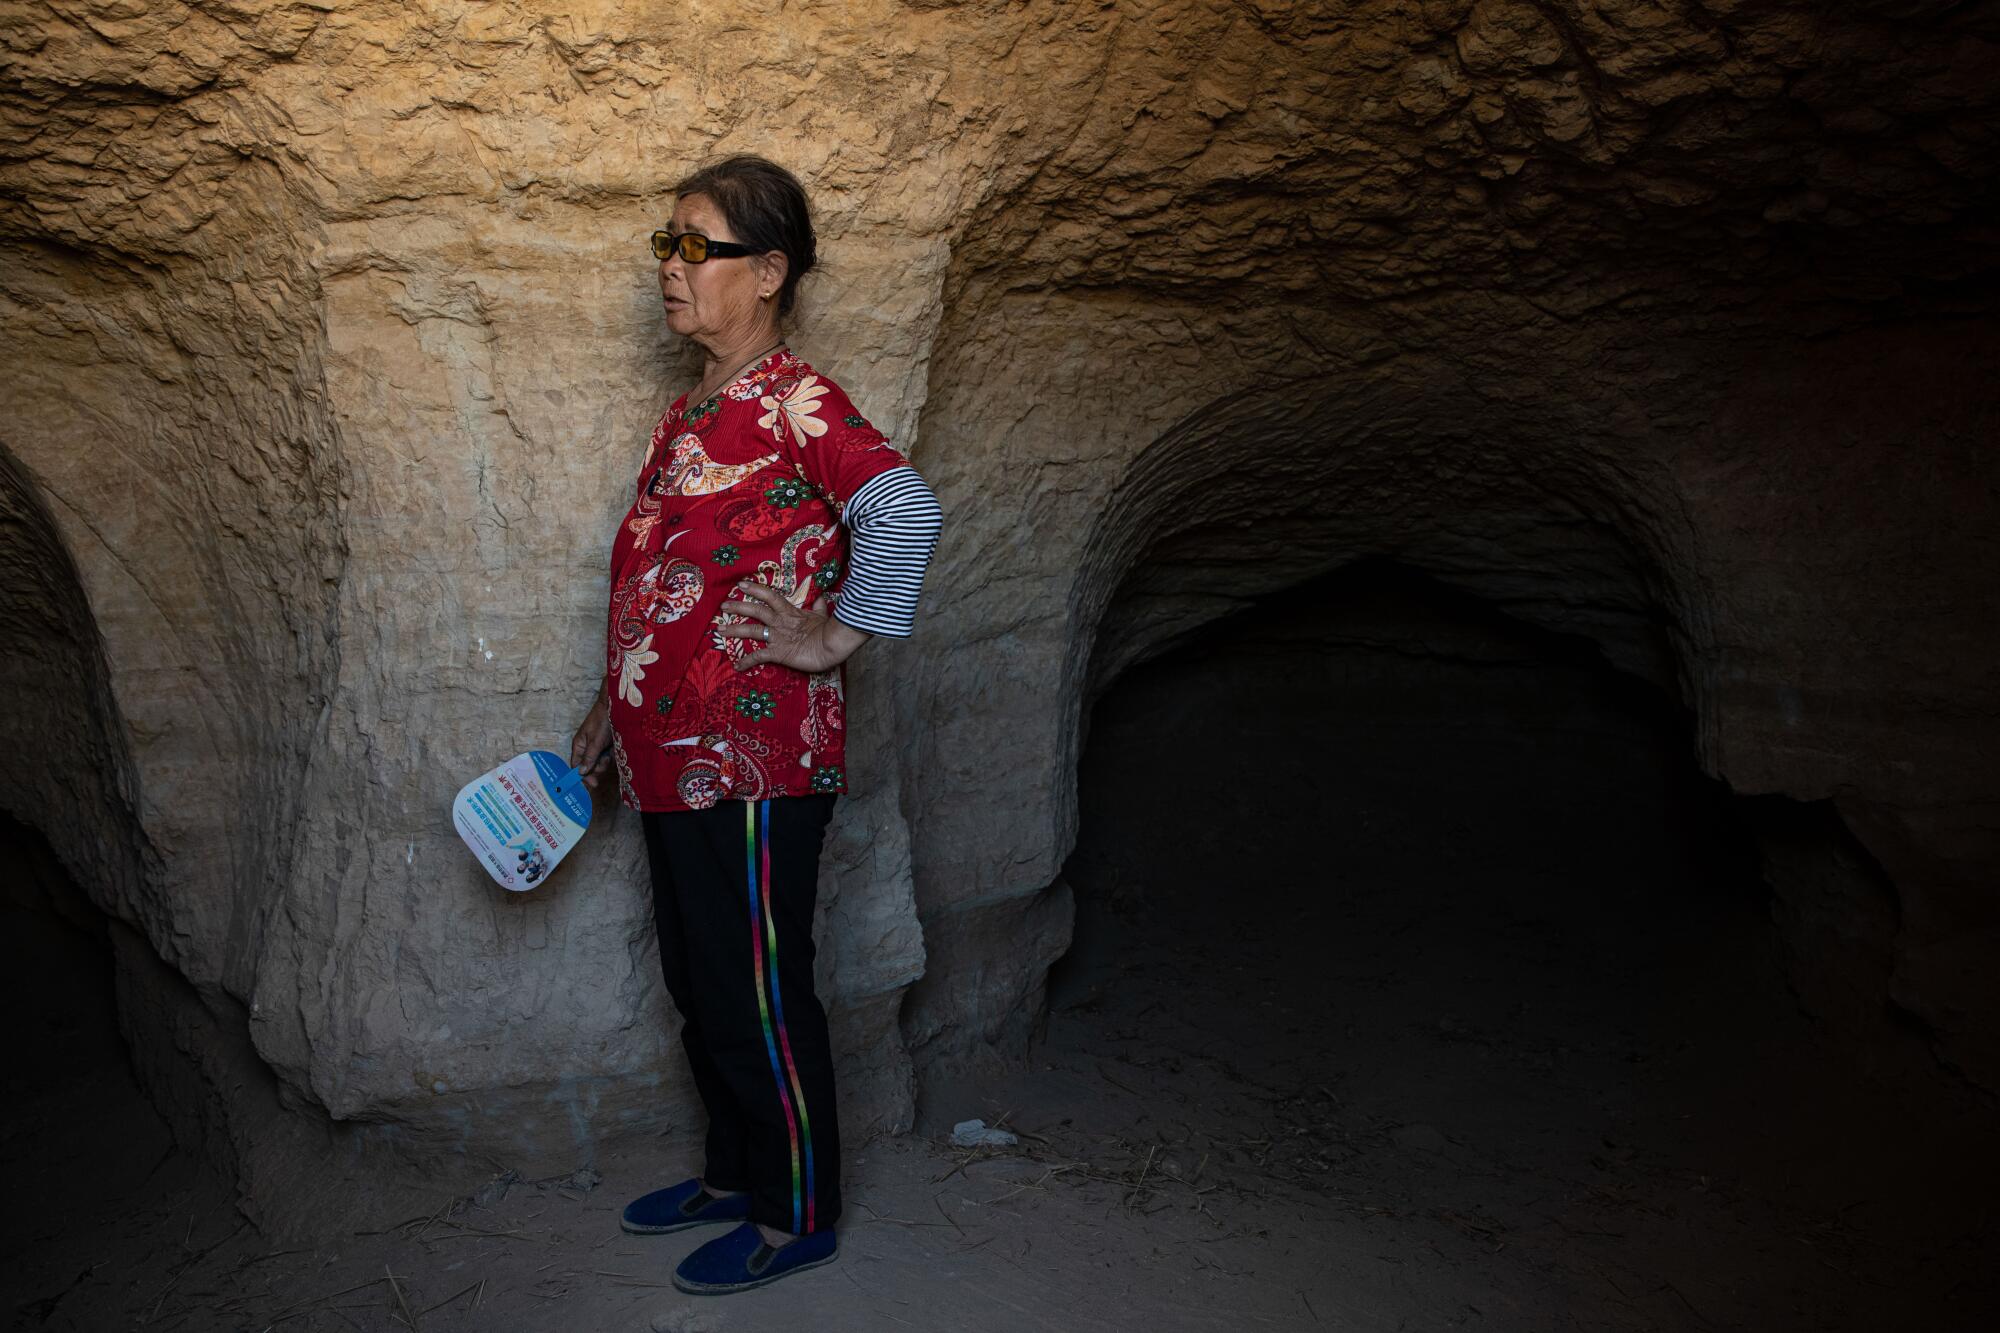 A woman in a red flowery top and dark pants stands near a stone arch in a cave